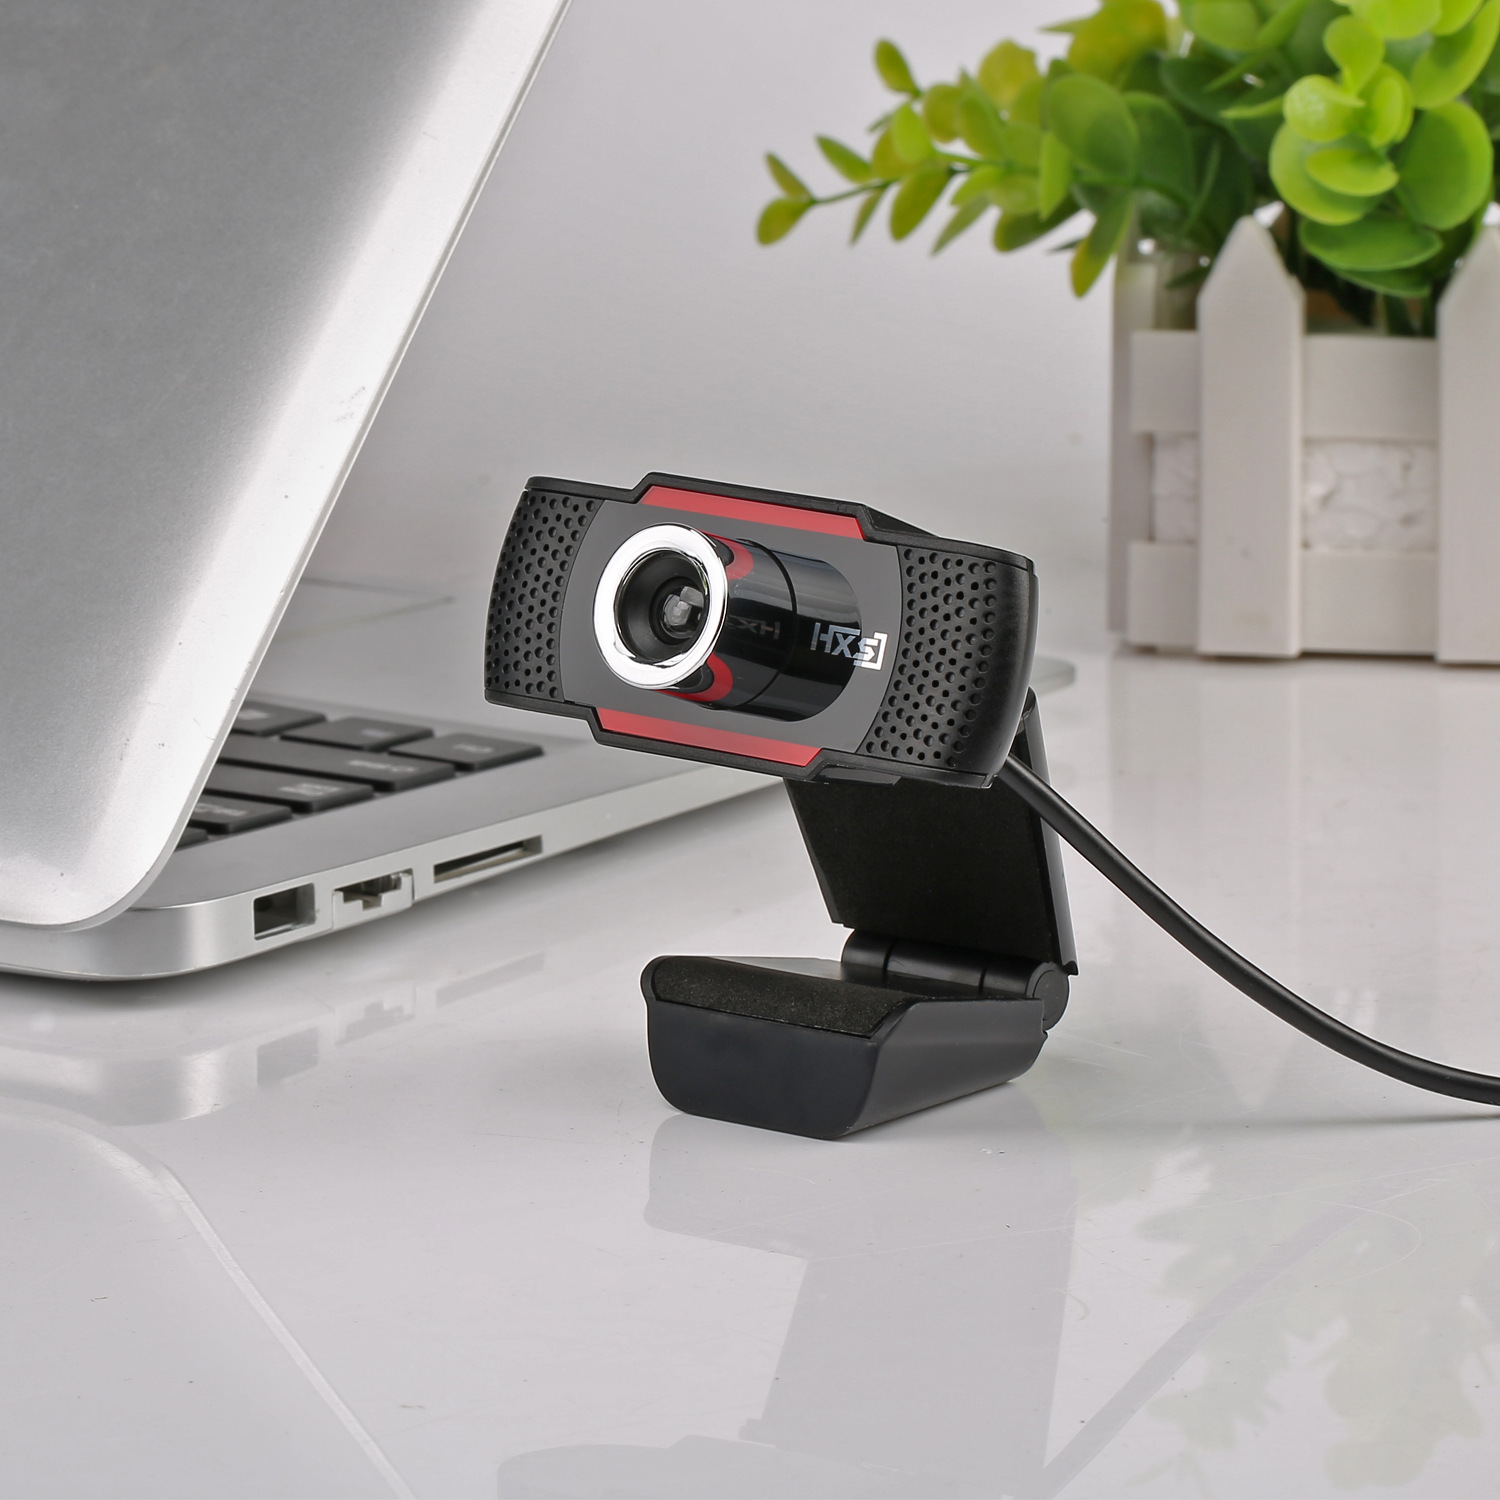 R9 480P HD USB Webcams 2MP Computer Camera Built-In Sound-Absorbing Microphone 640x480 Dynamic Resolution